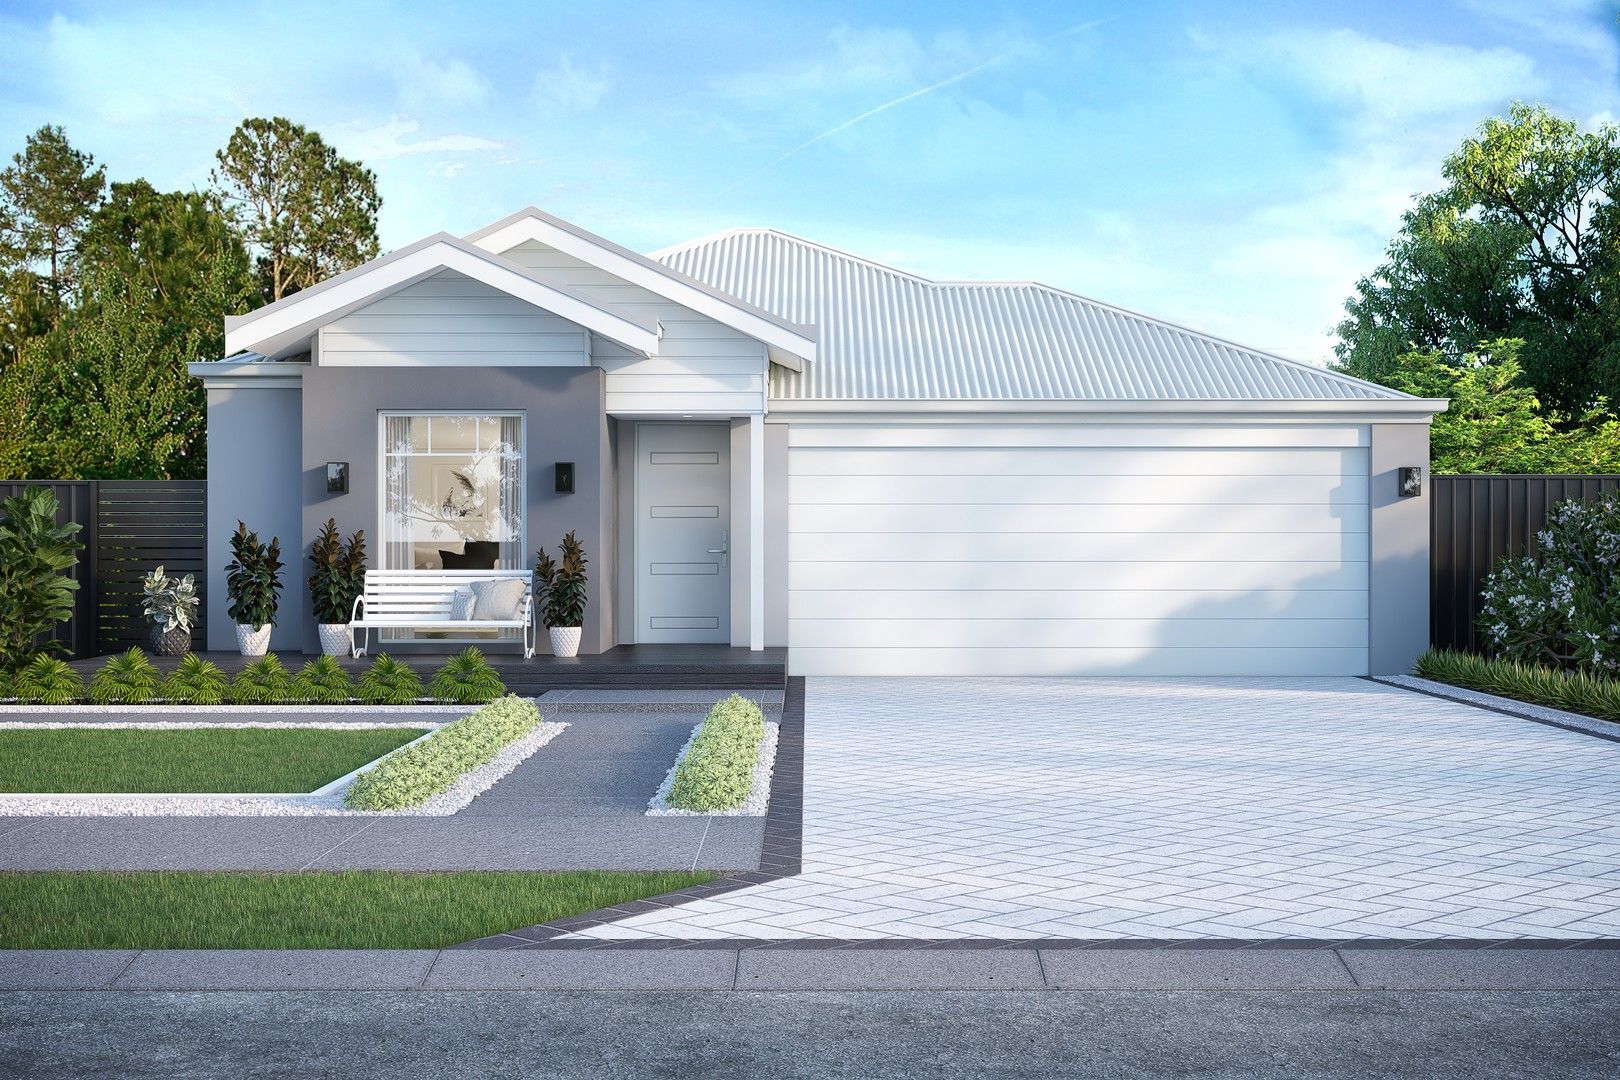 3 bedrooms New House & Land in  SOUTH YUNDERUP WA, 6208